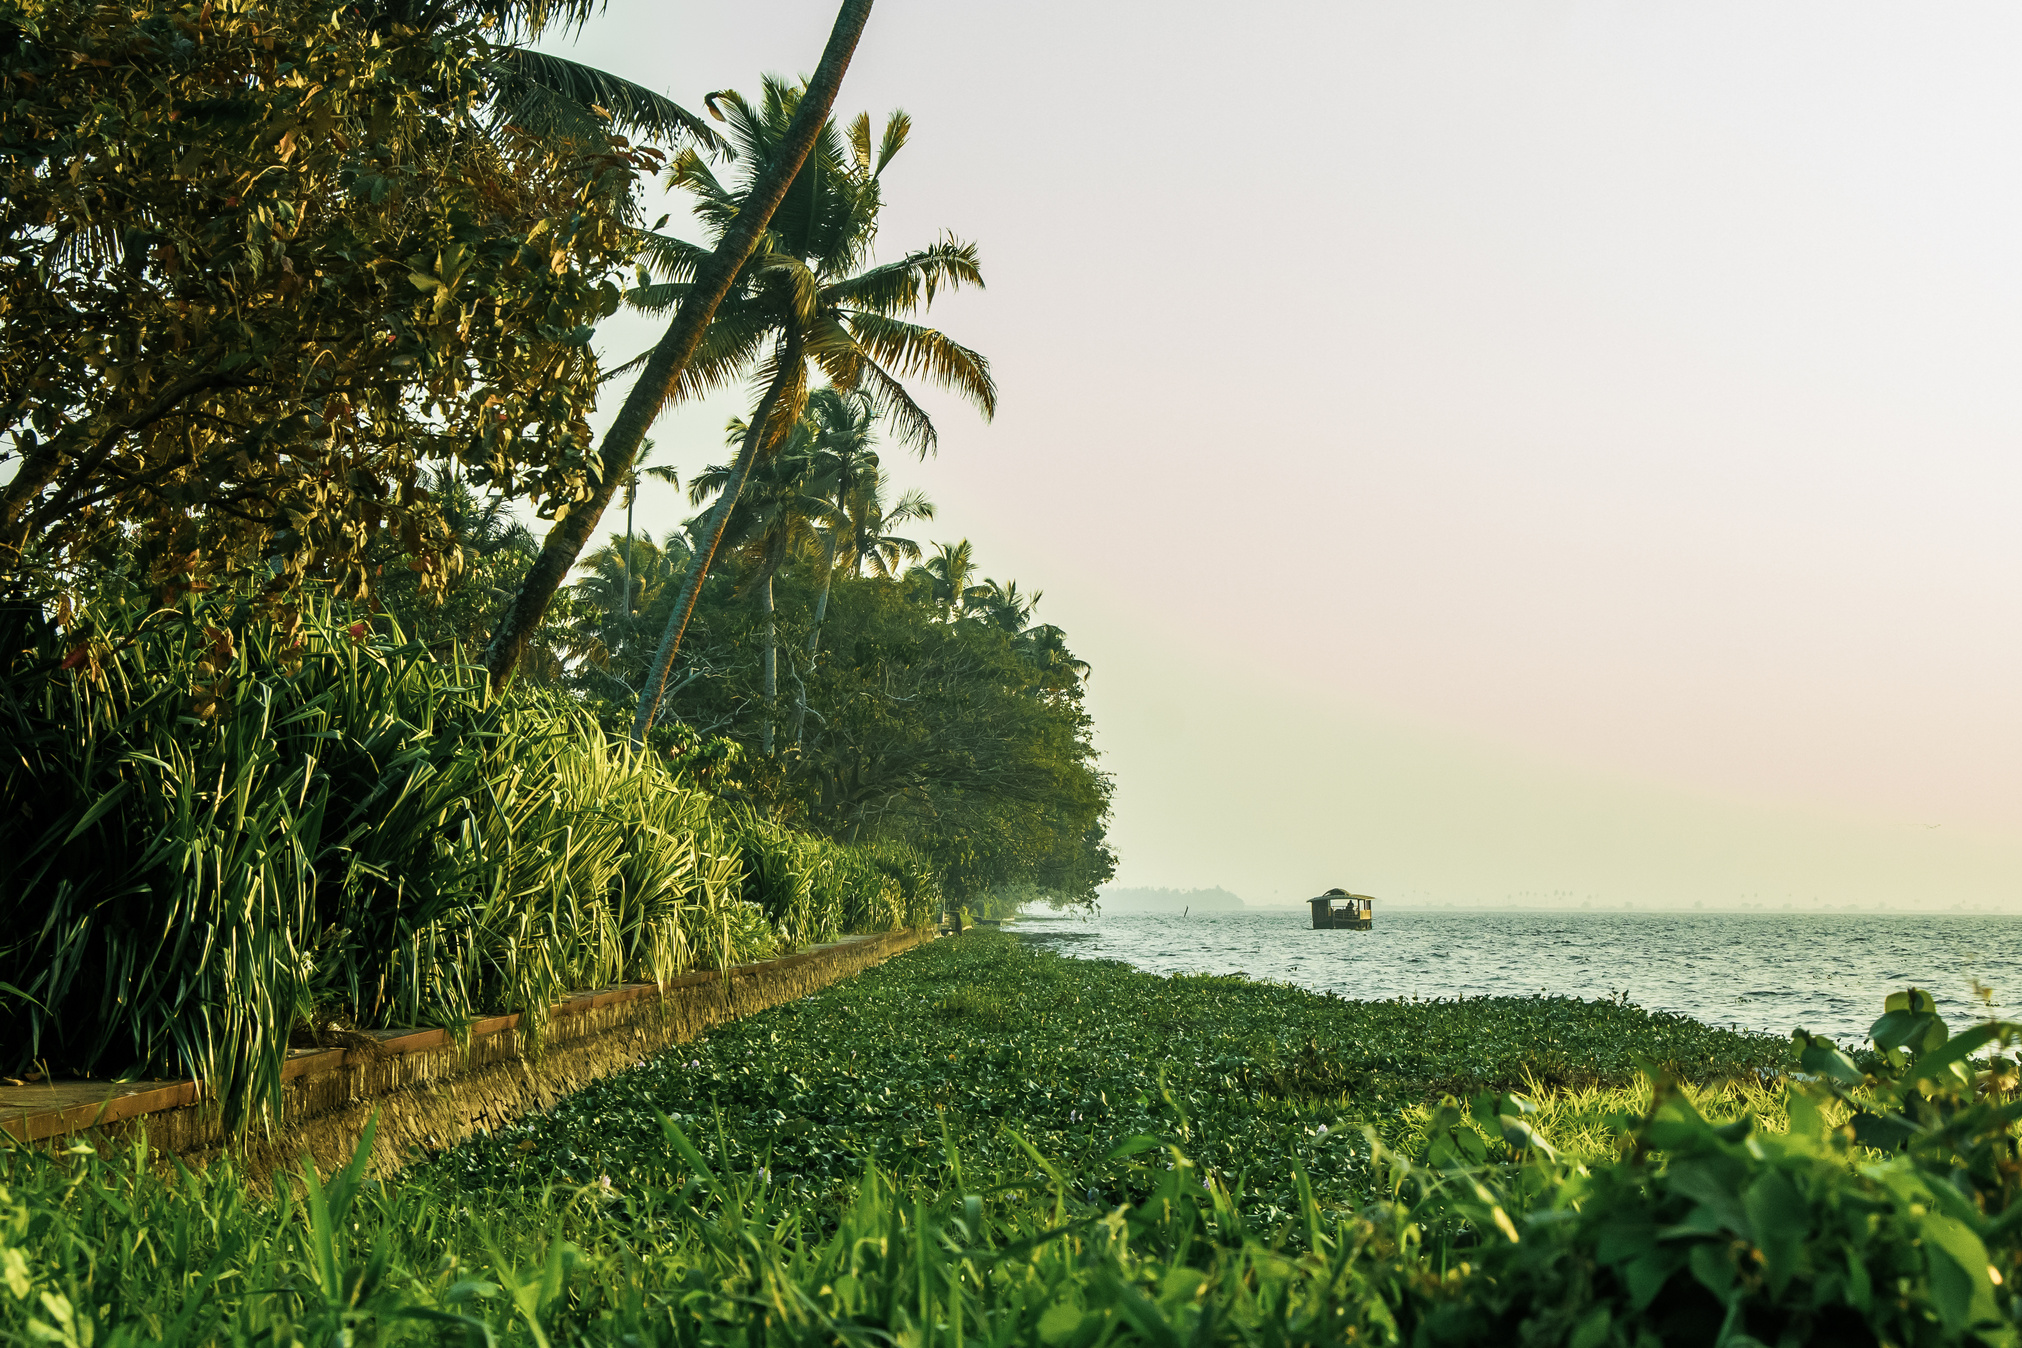 Kerala Backwaters with Palm Trees Landscape